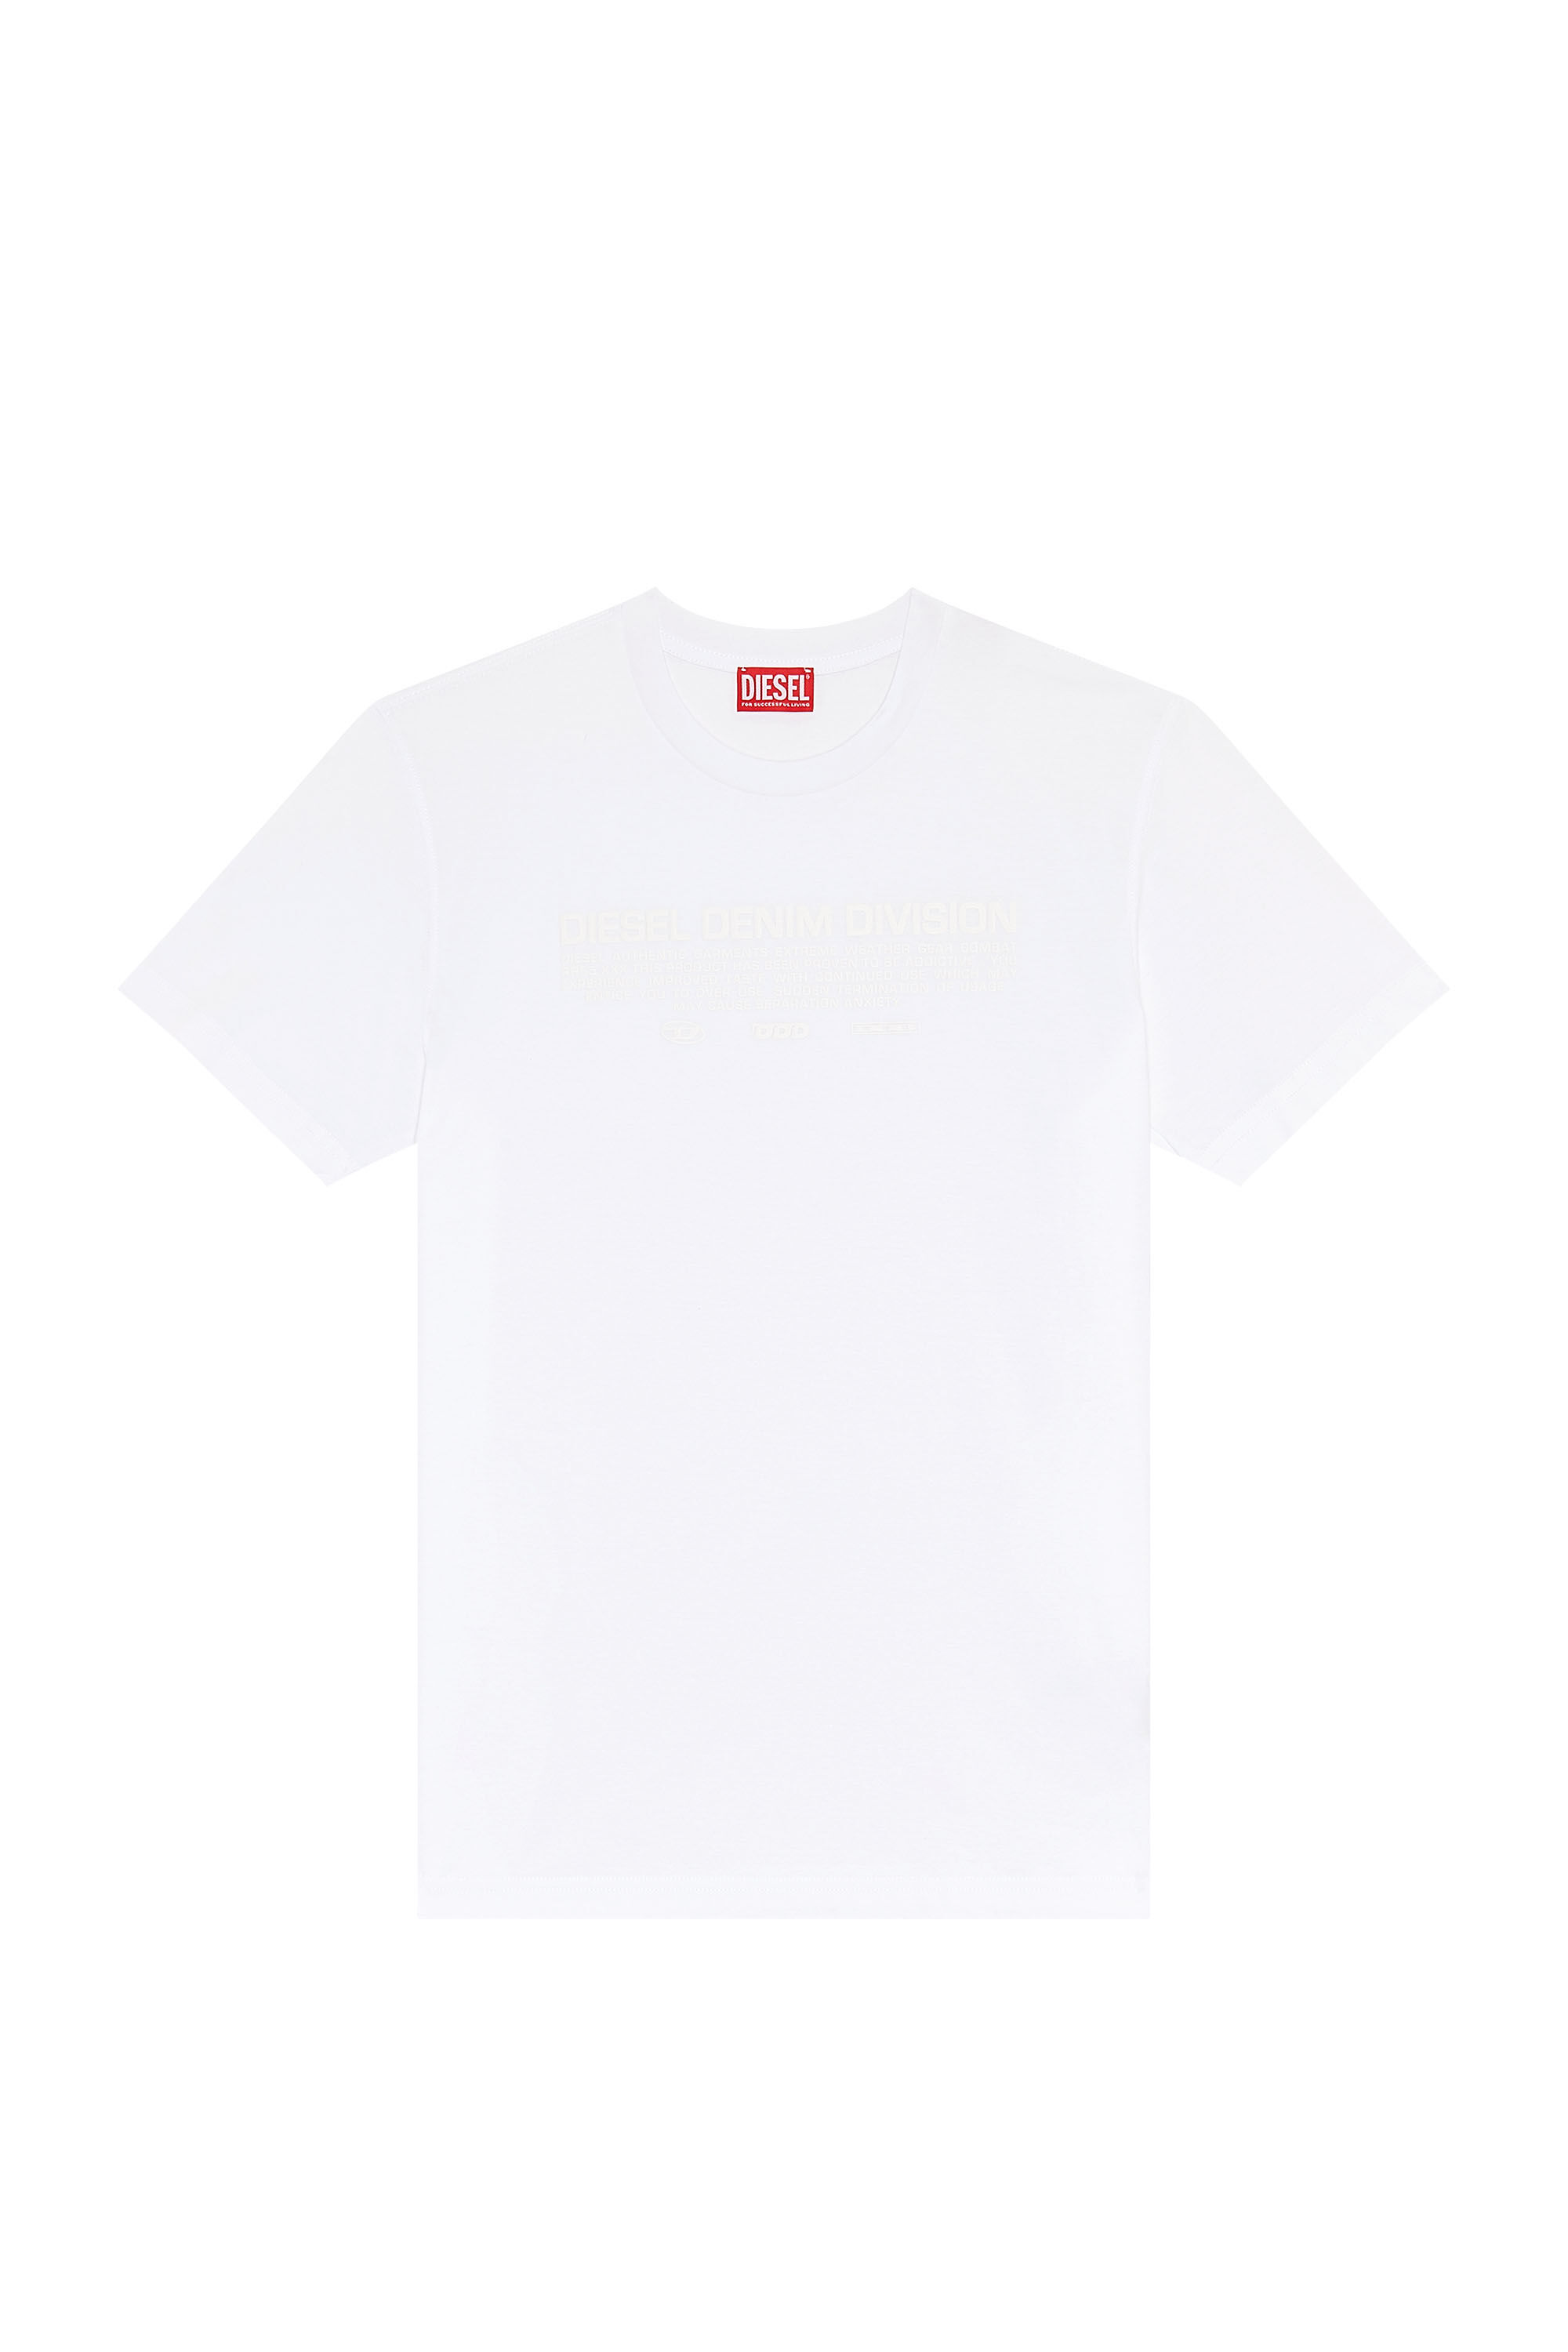 Diesel - T-MIEGOR-L12, White - Image 2